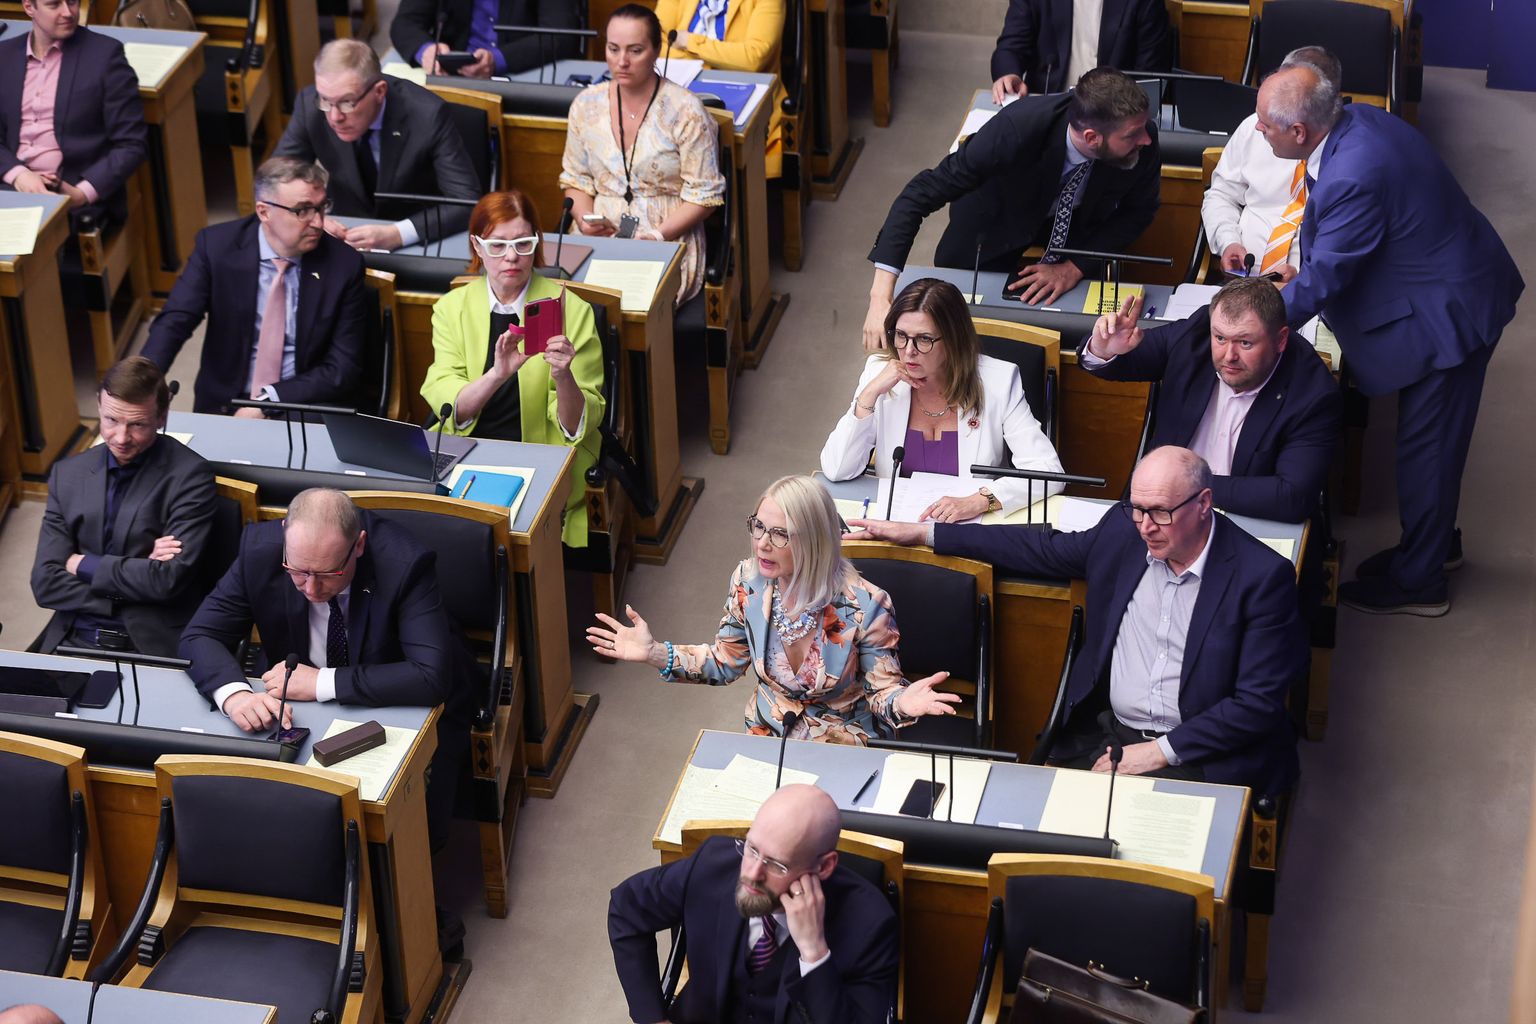 MPs from the opposition parties Estonian Conservative People's Party (EKRE), Center Party and Isamaa walked out of the session hall of the parliament in protest late on Monday evening.